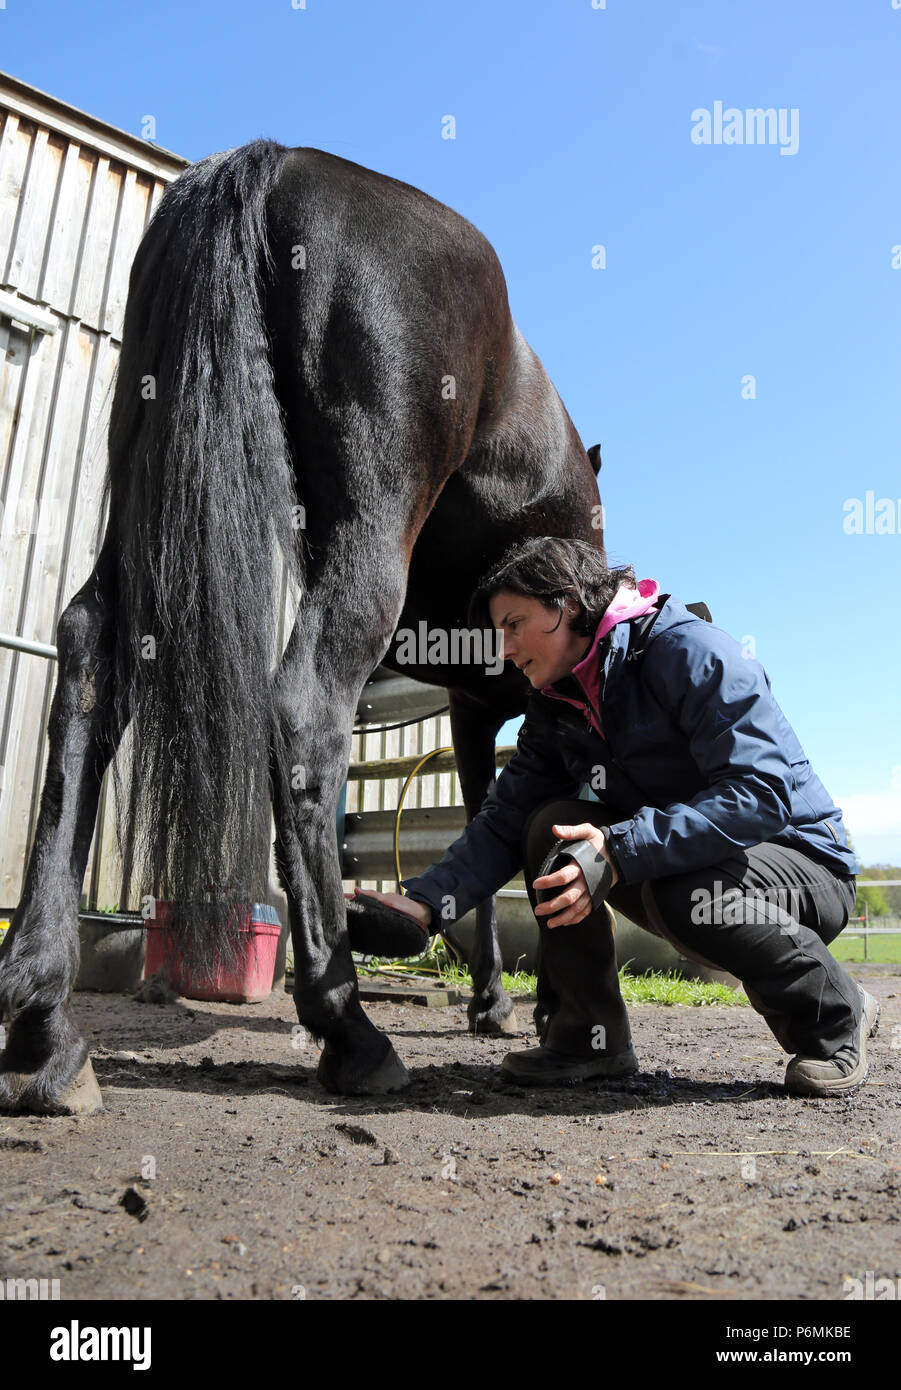 Melbeck, a woman brushing a hind leg of her horse Stock Photo